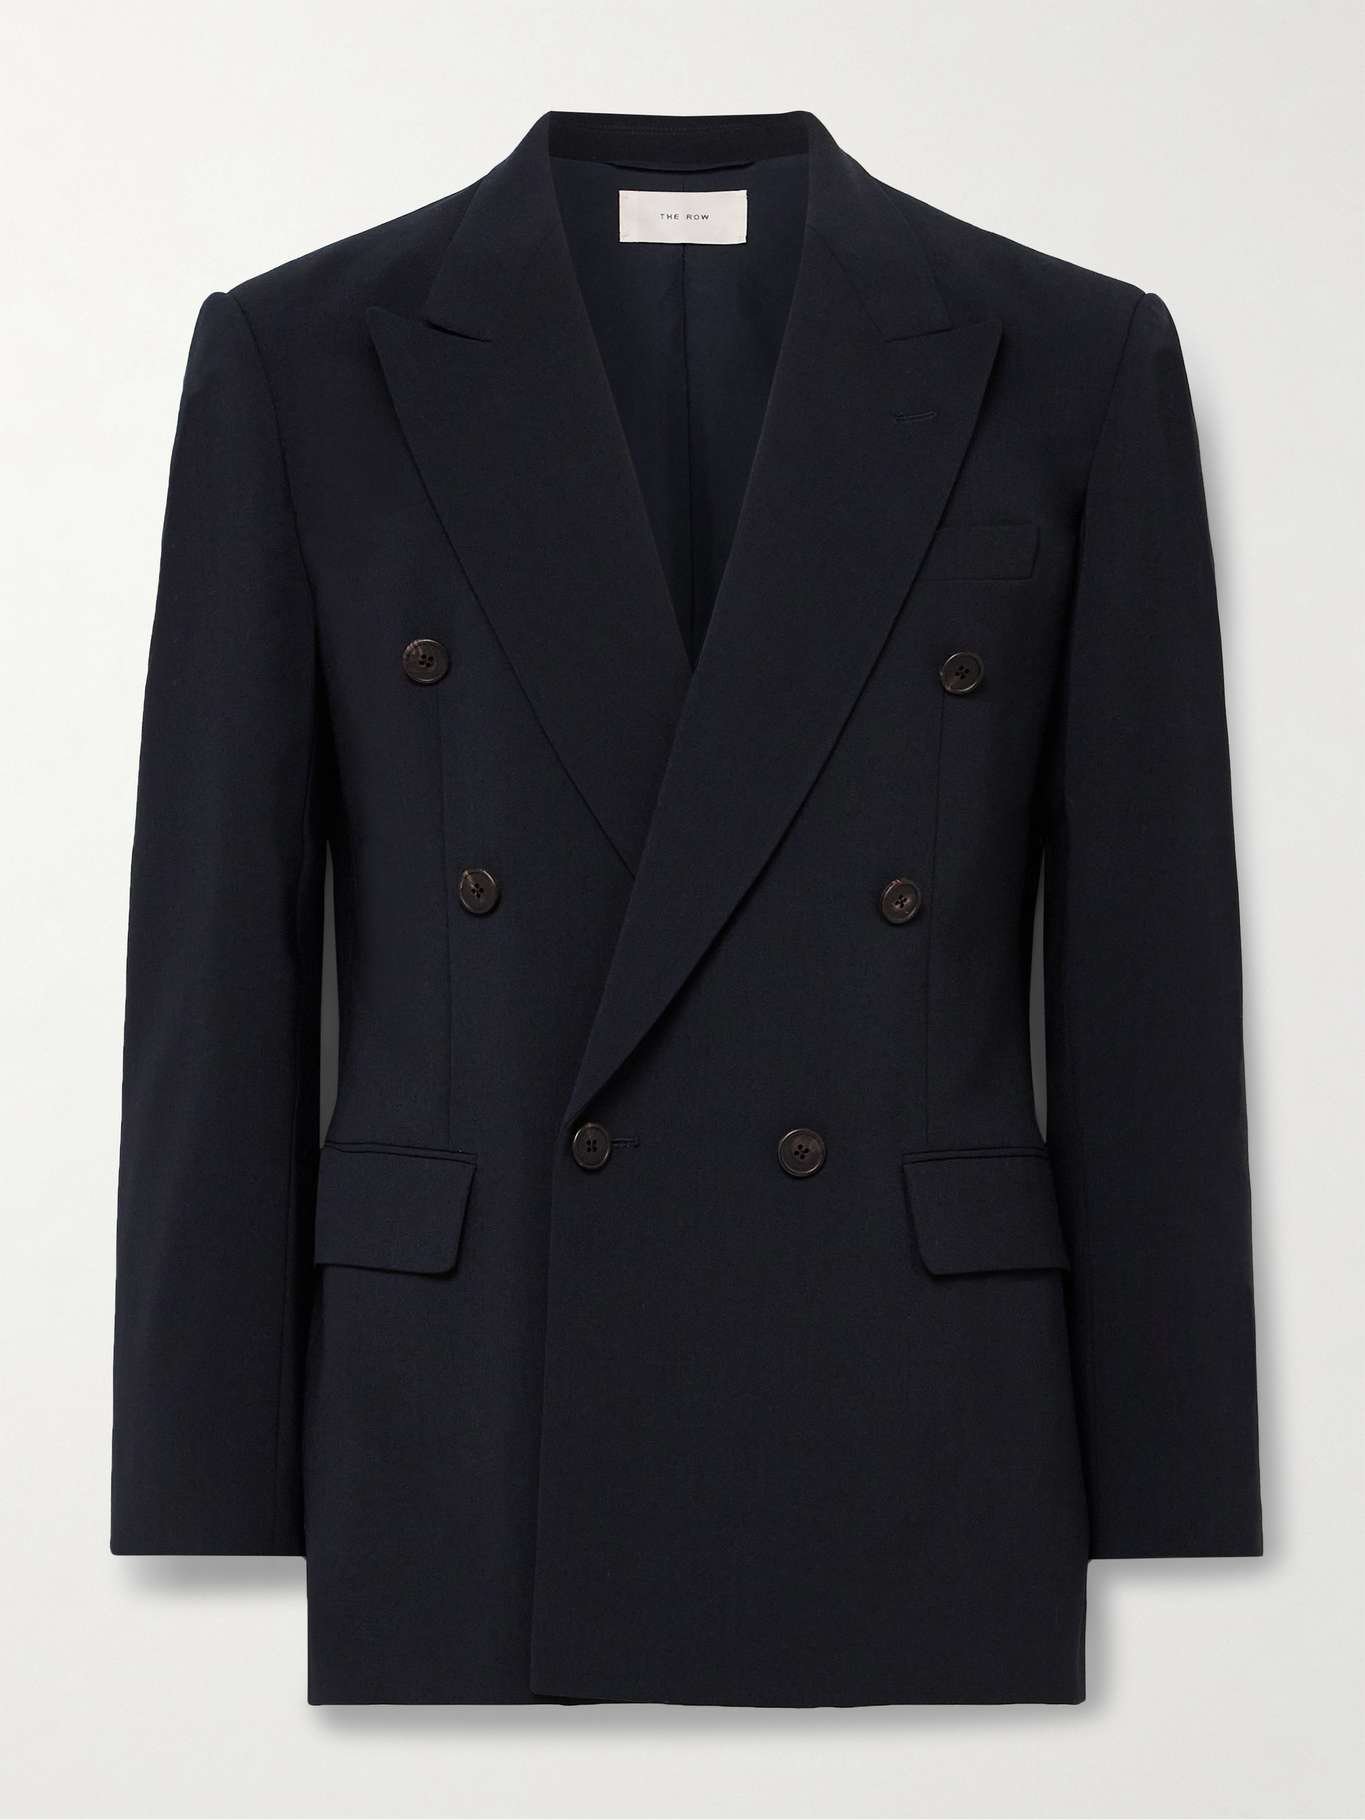 THE ROW double-breasted blazer at MR PORTER - £2,080